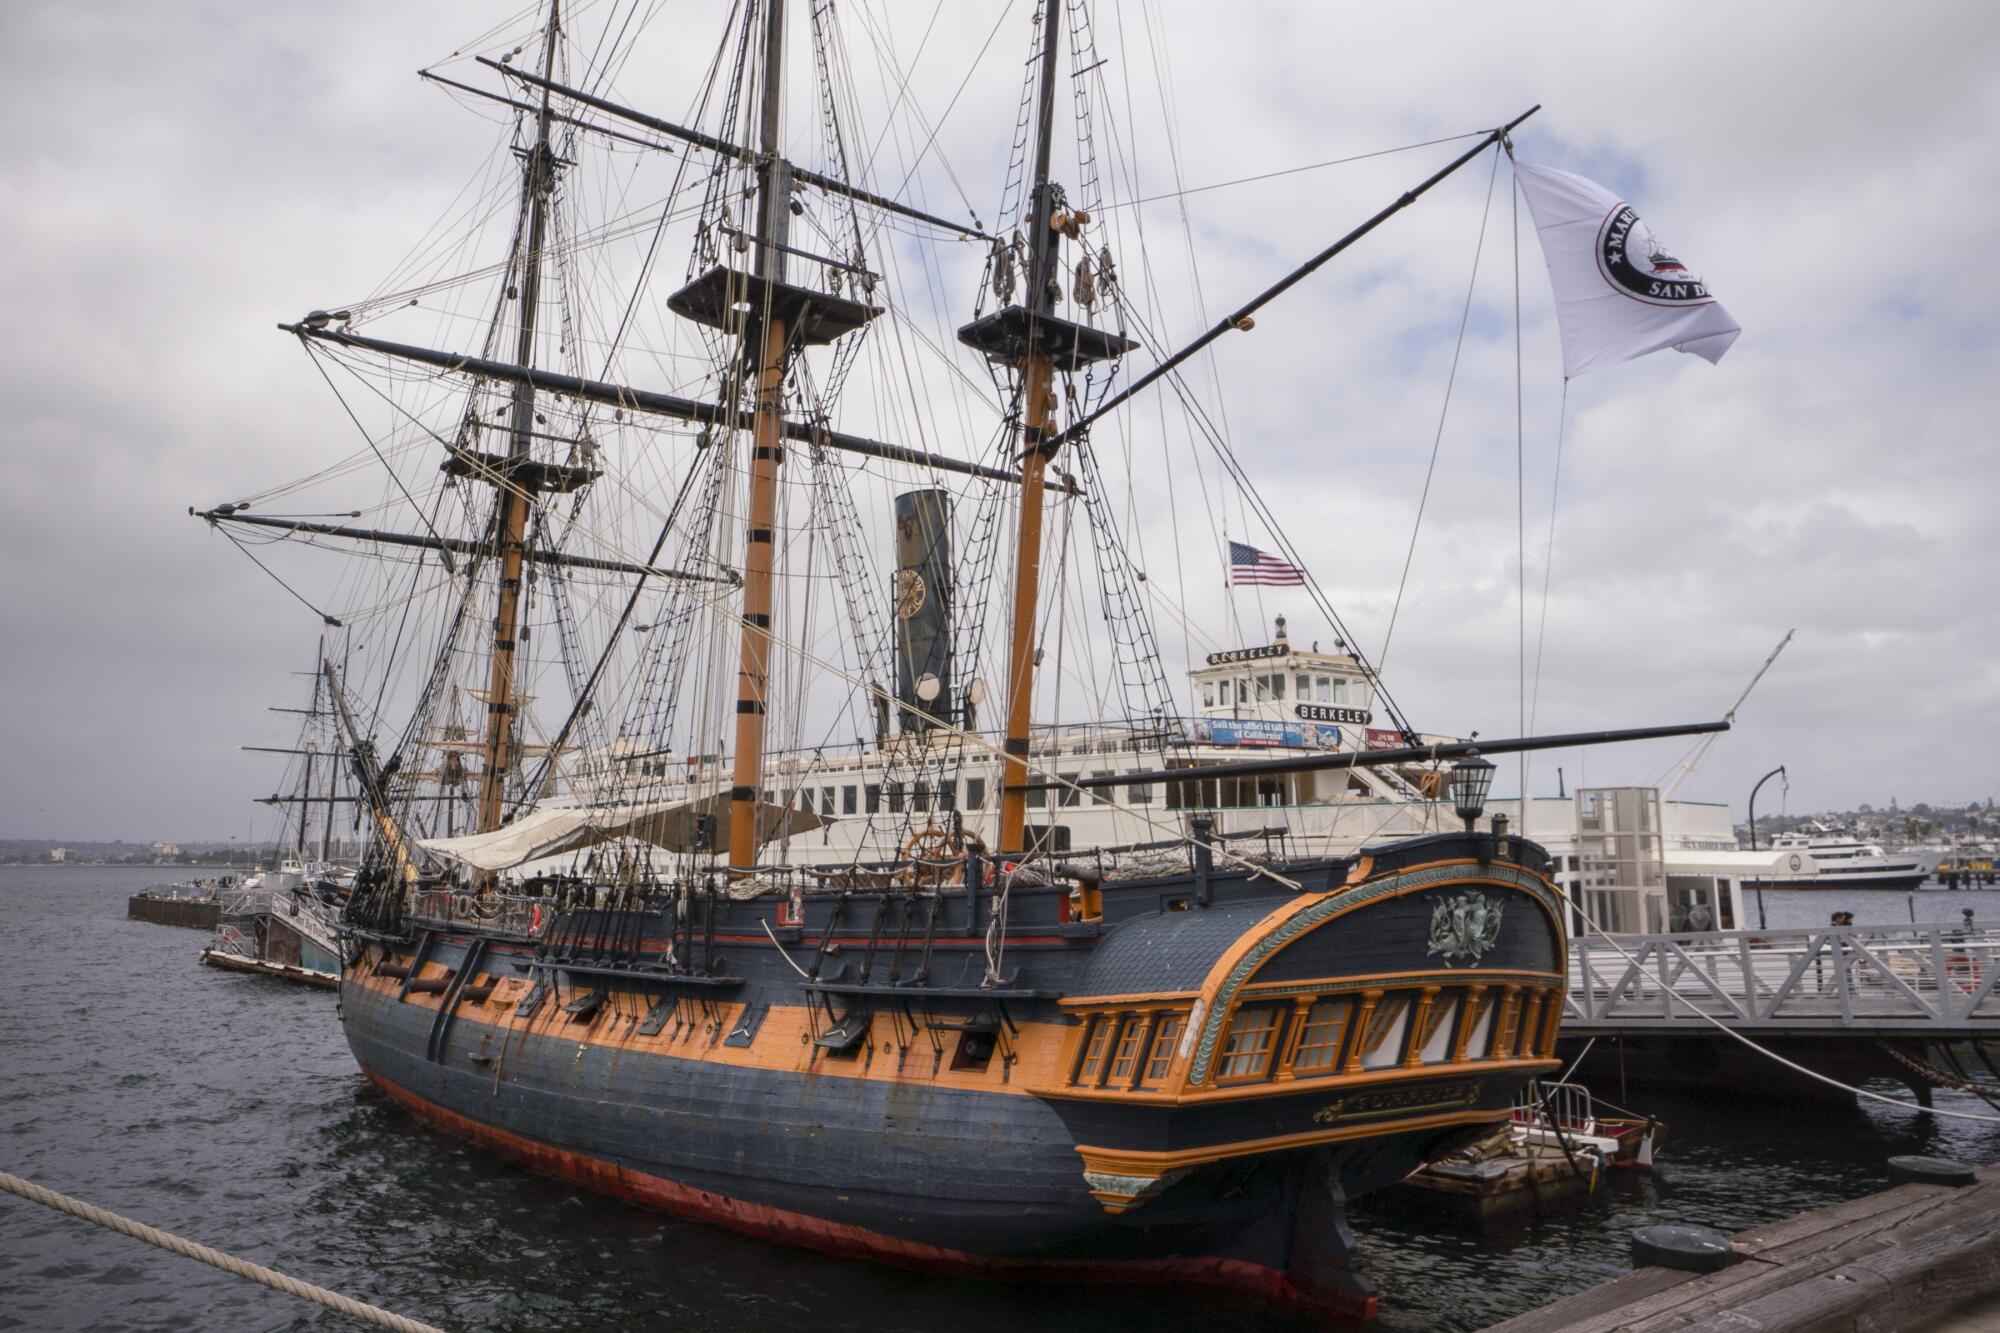 The HMS Surprise is berthed at the Maritime Museum of San Diego